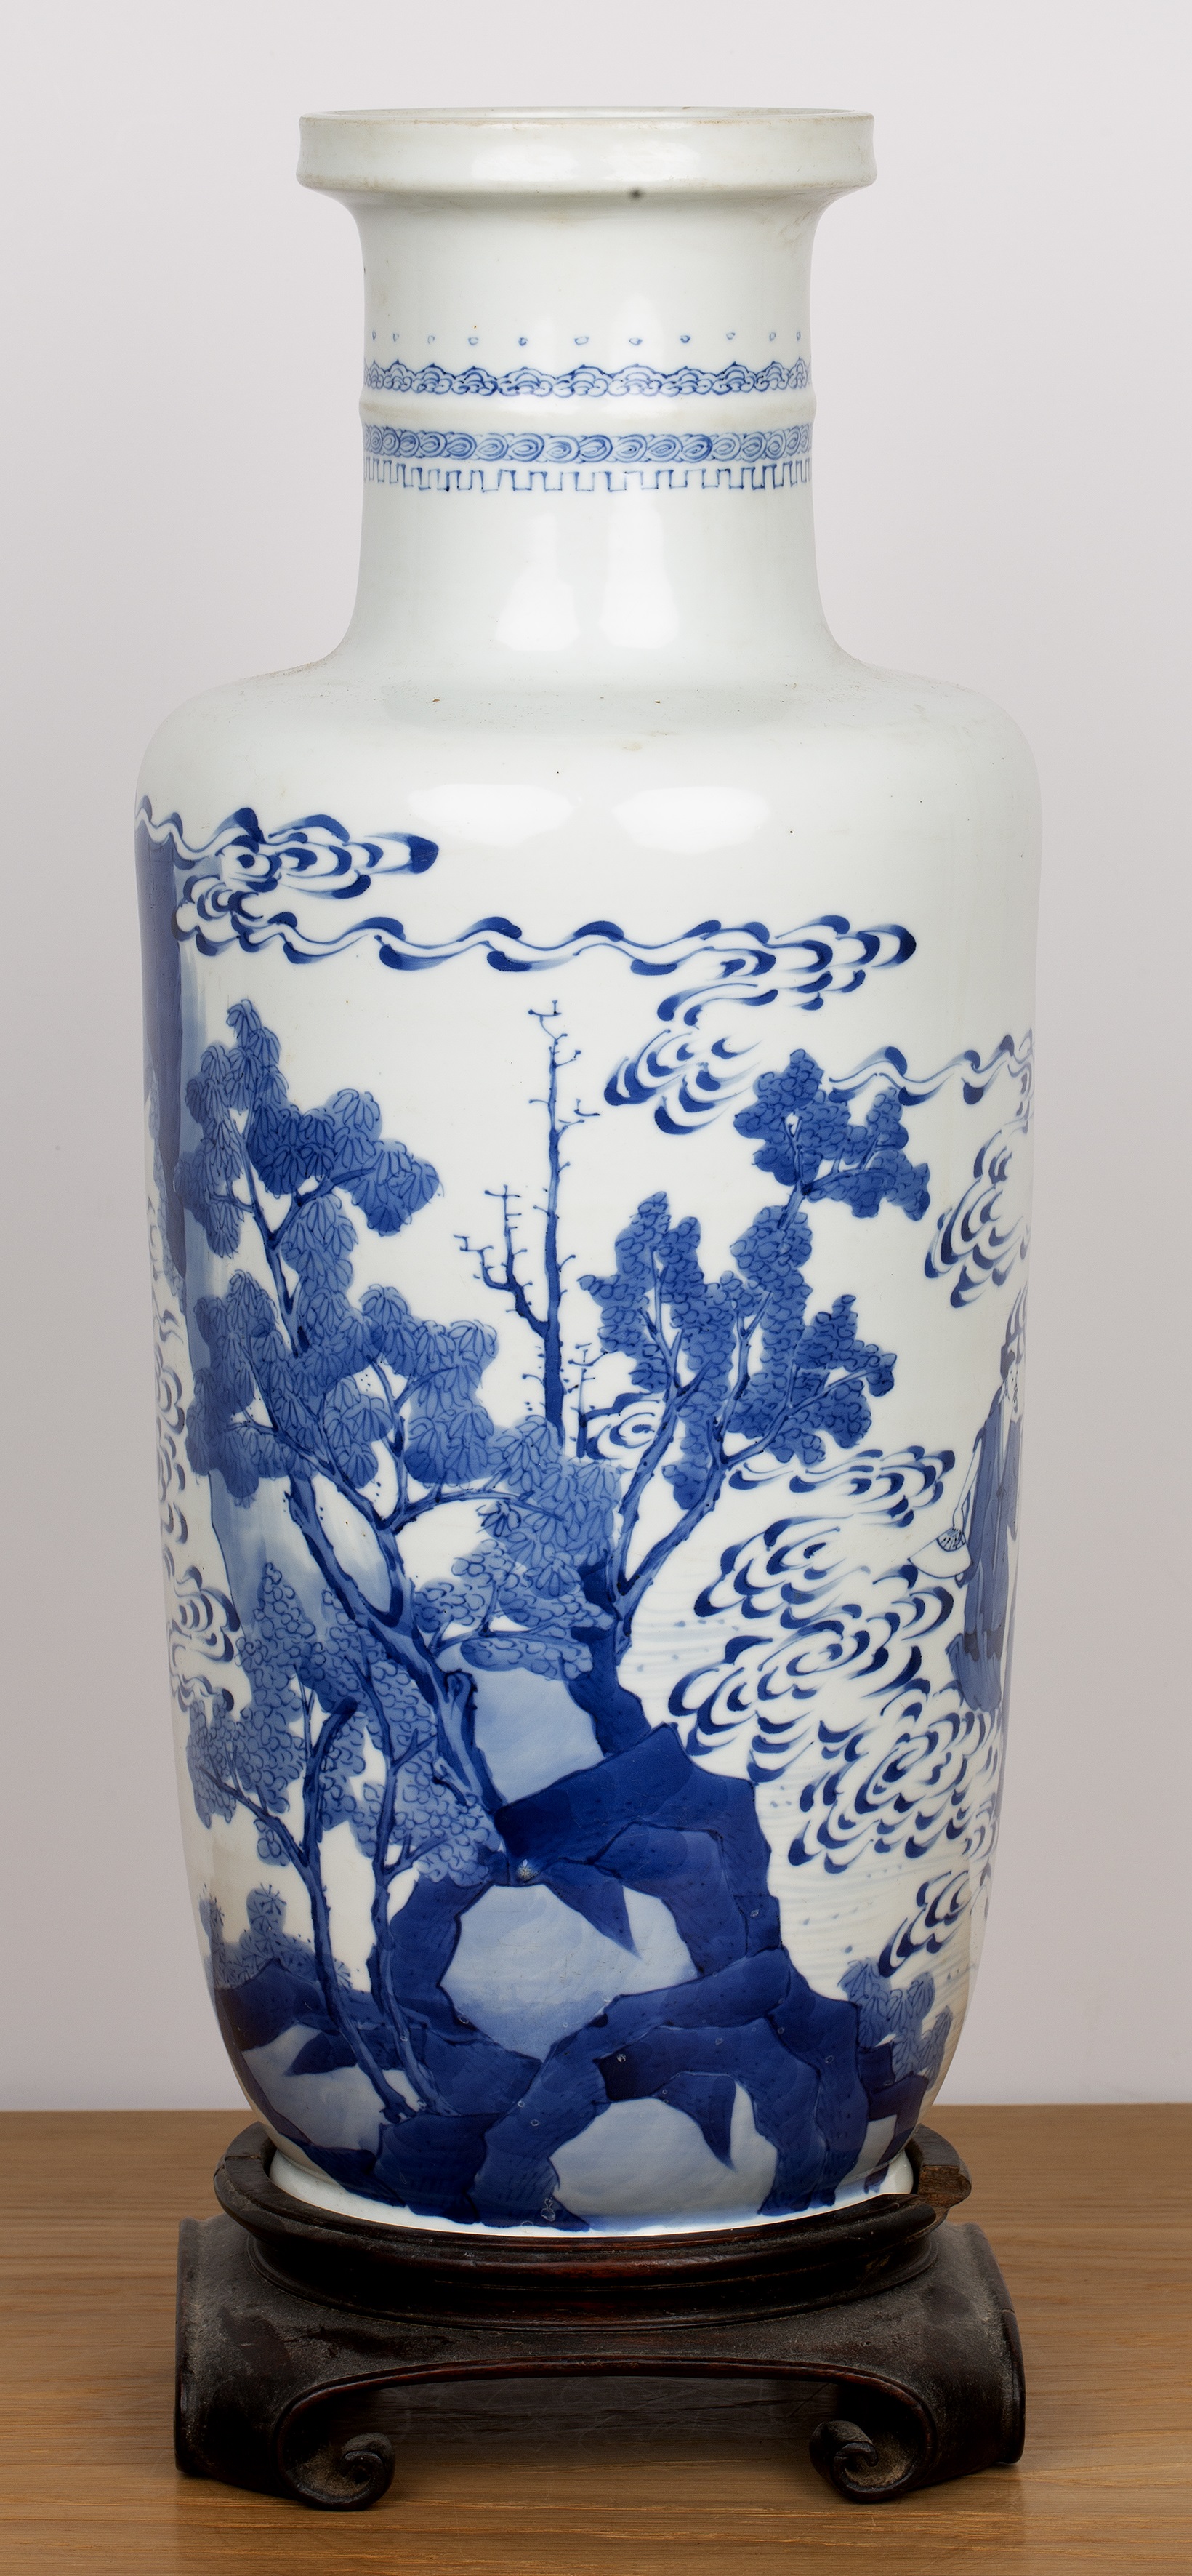 Blue and white porcelain rouleau vase Chinese, Kangxi painted with scholars, clouds, and figures - Image 4 of 33